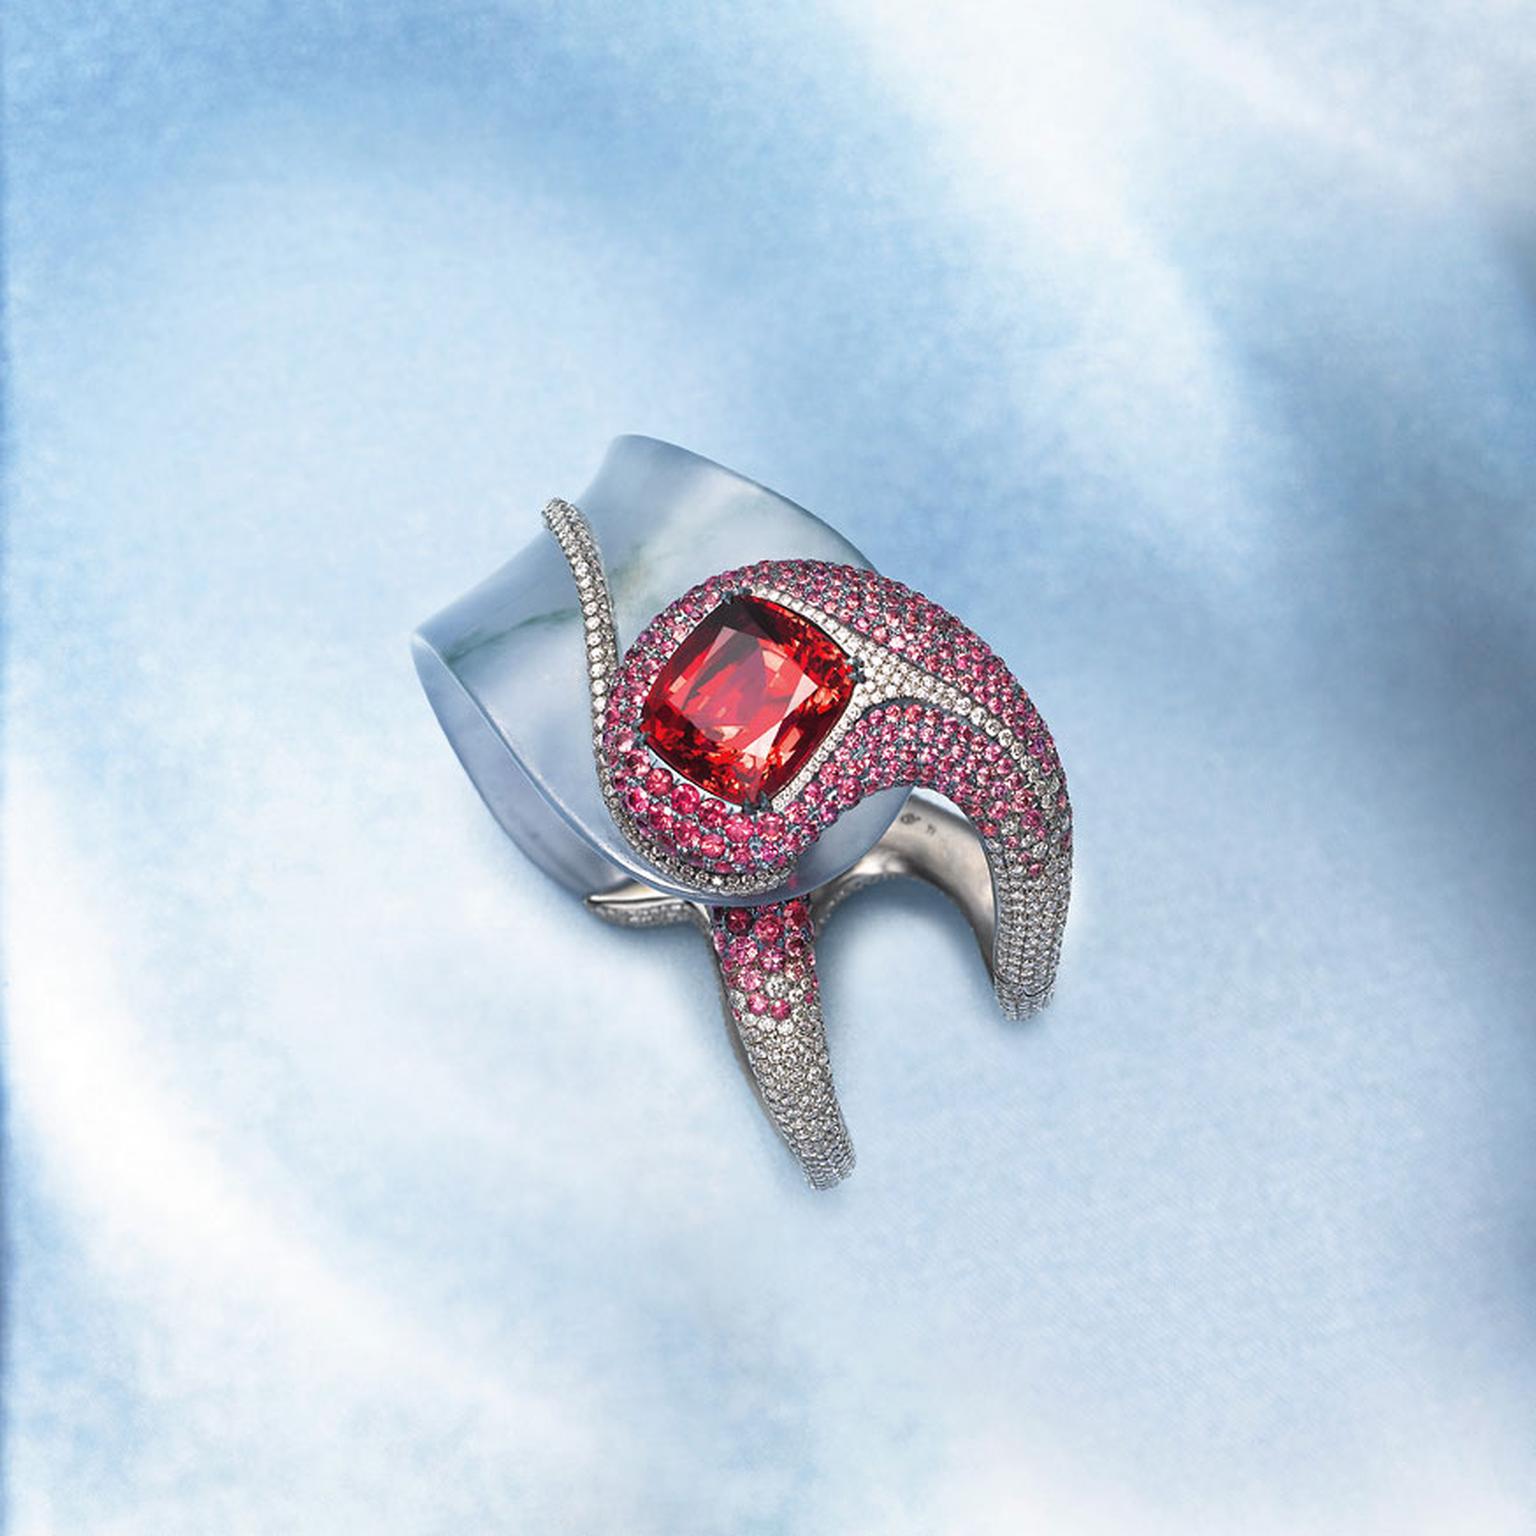 Edmond Chin red spinel, glass jadeite, red and pink spinel and platinum cuff